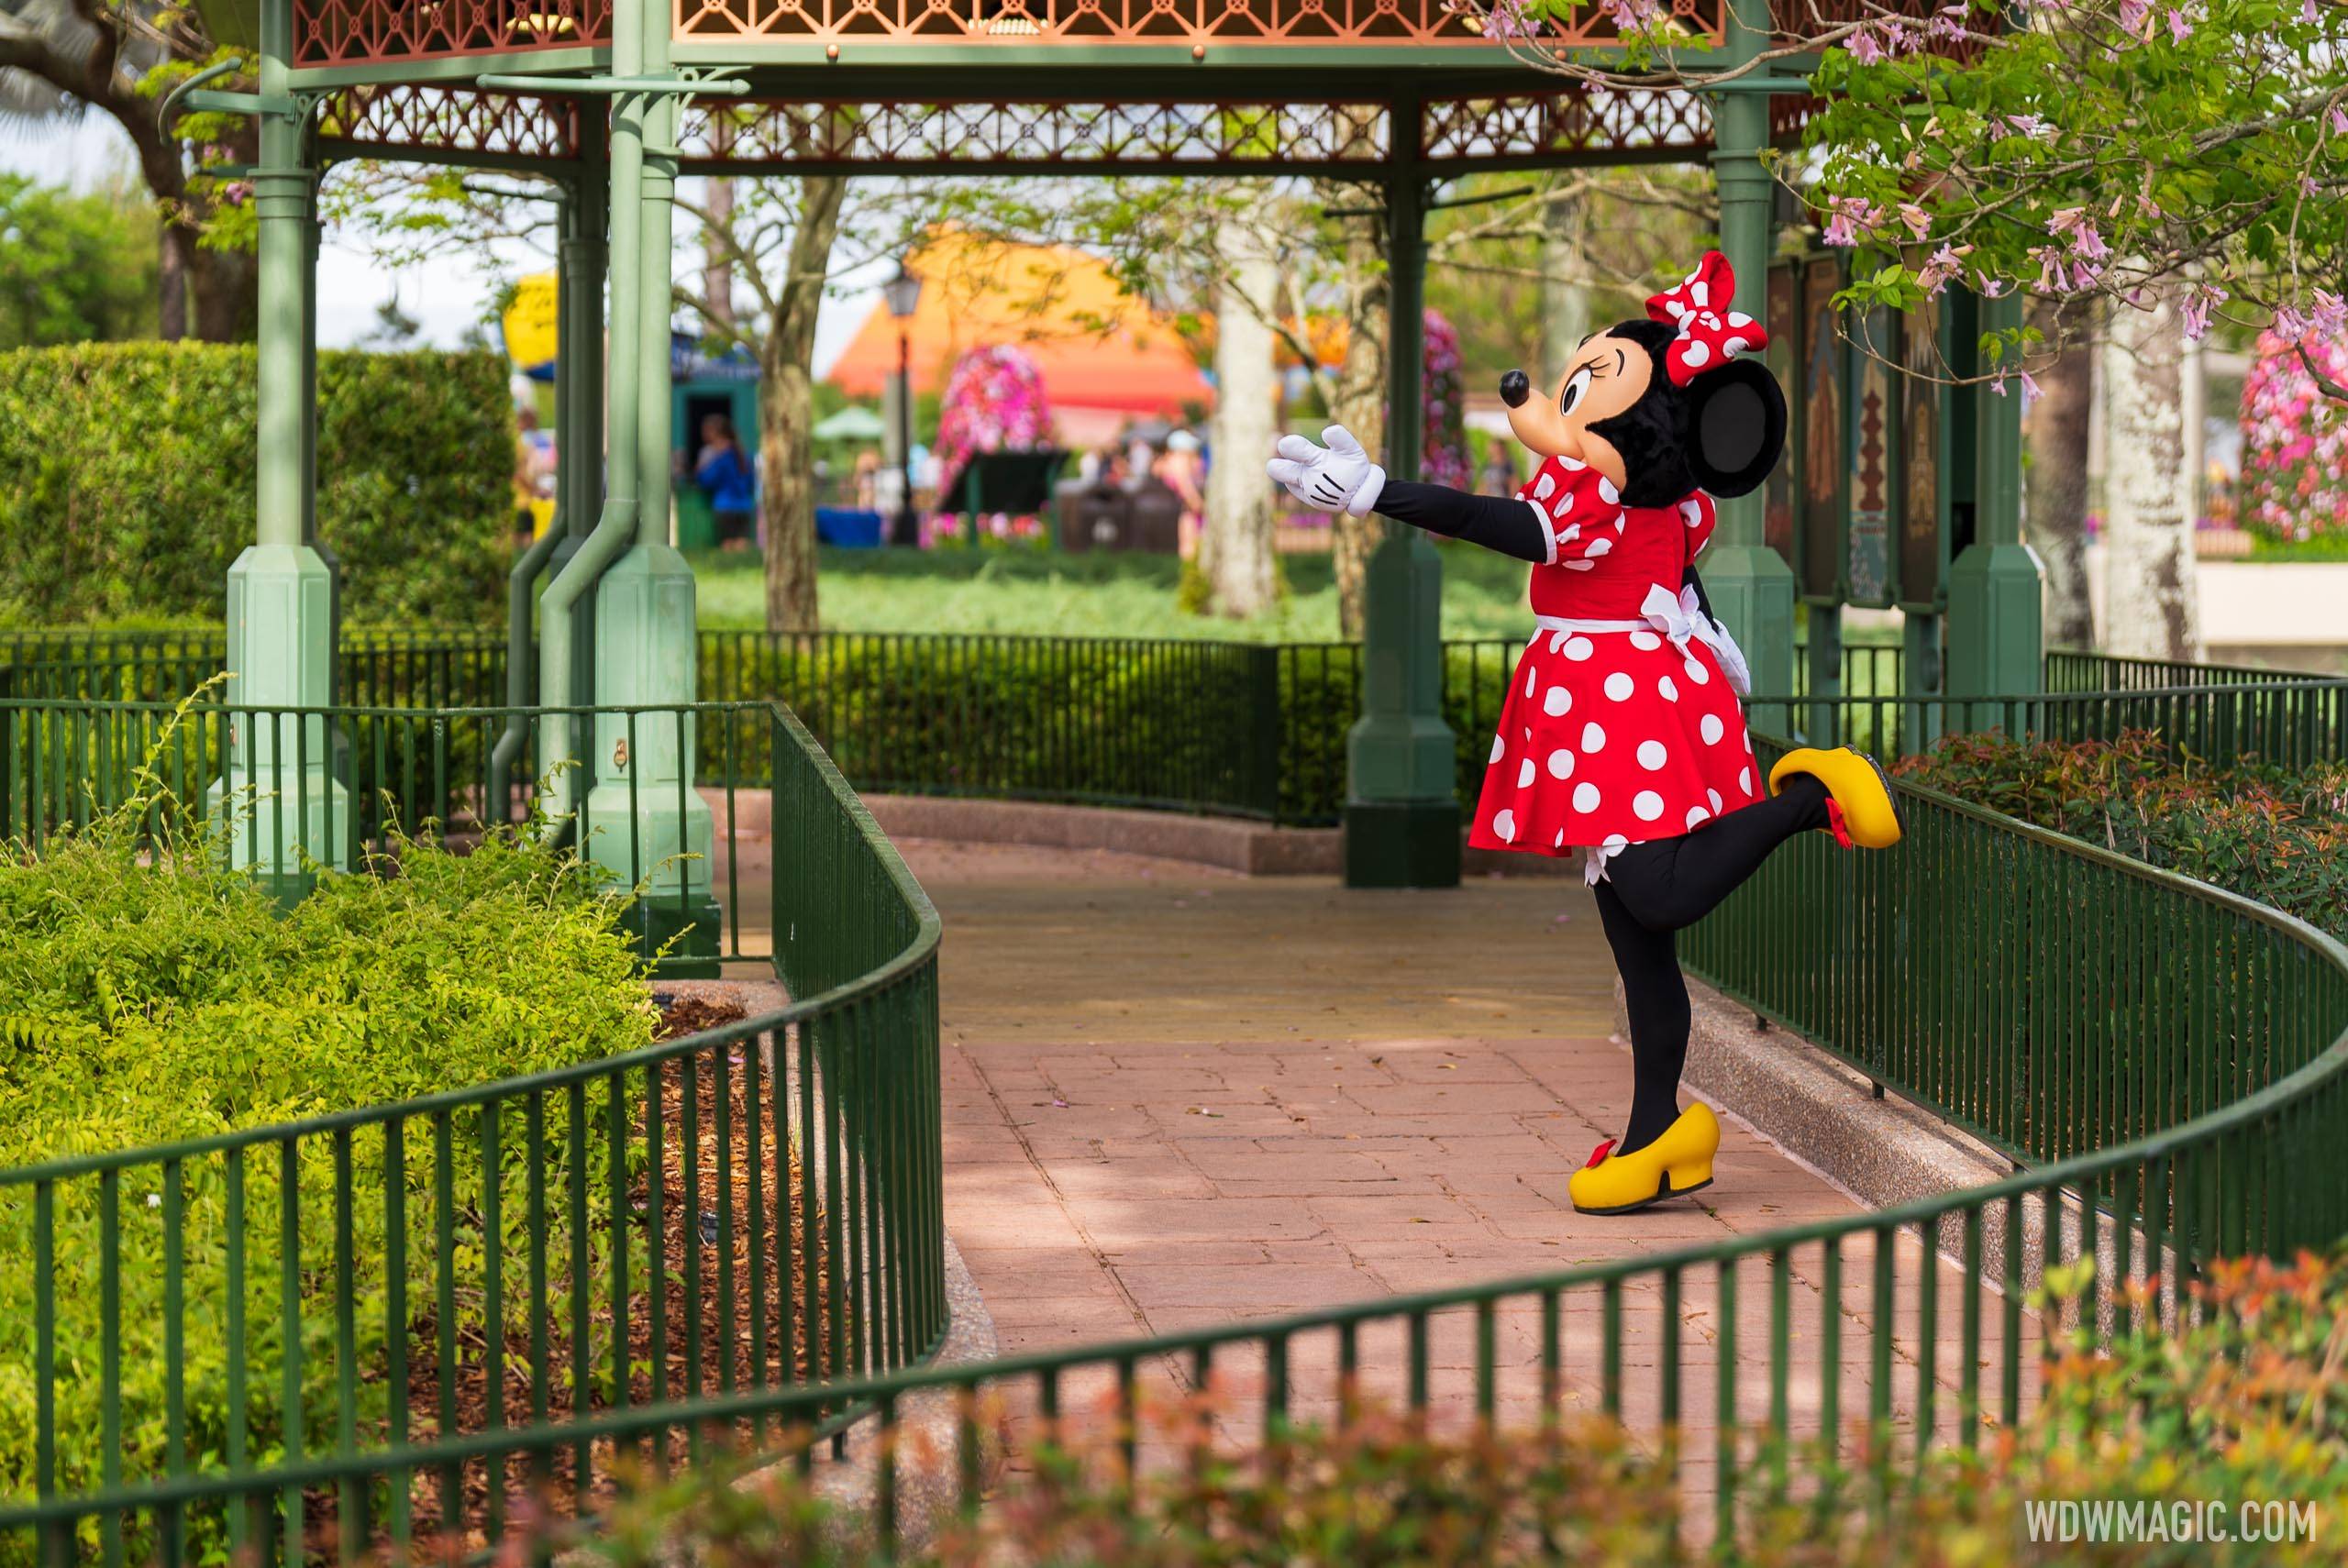 Minnie Mouse meeting guests in March at EPCOT from behind a fence